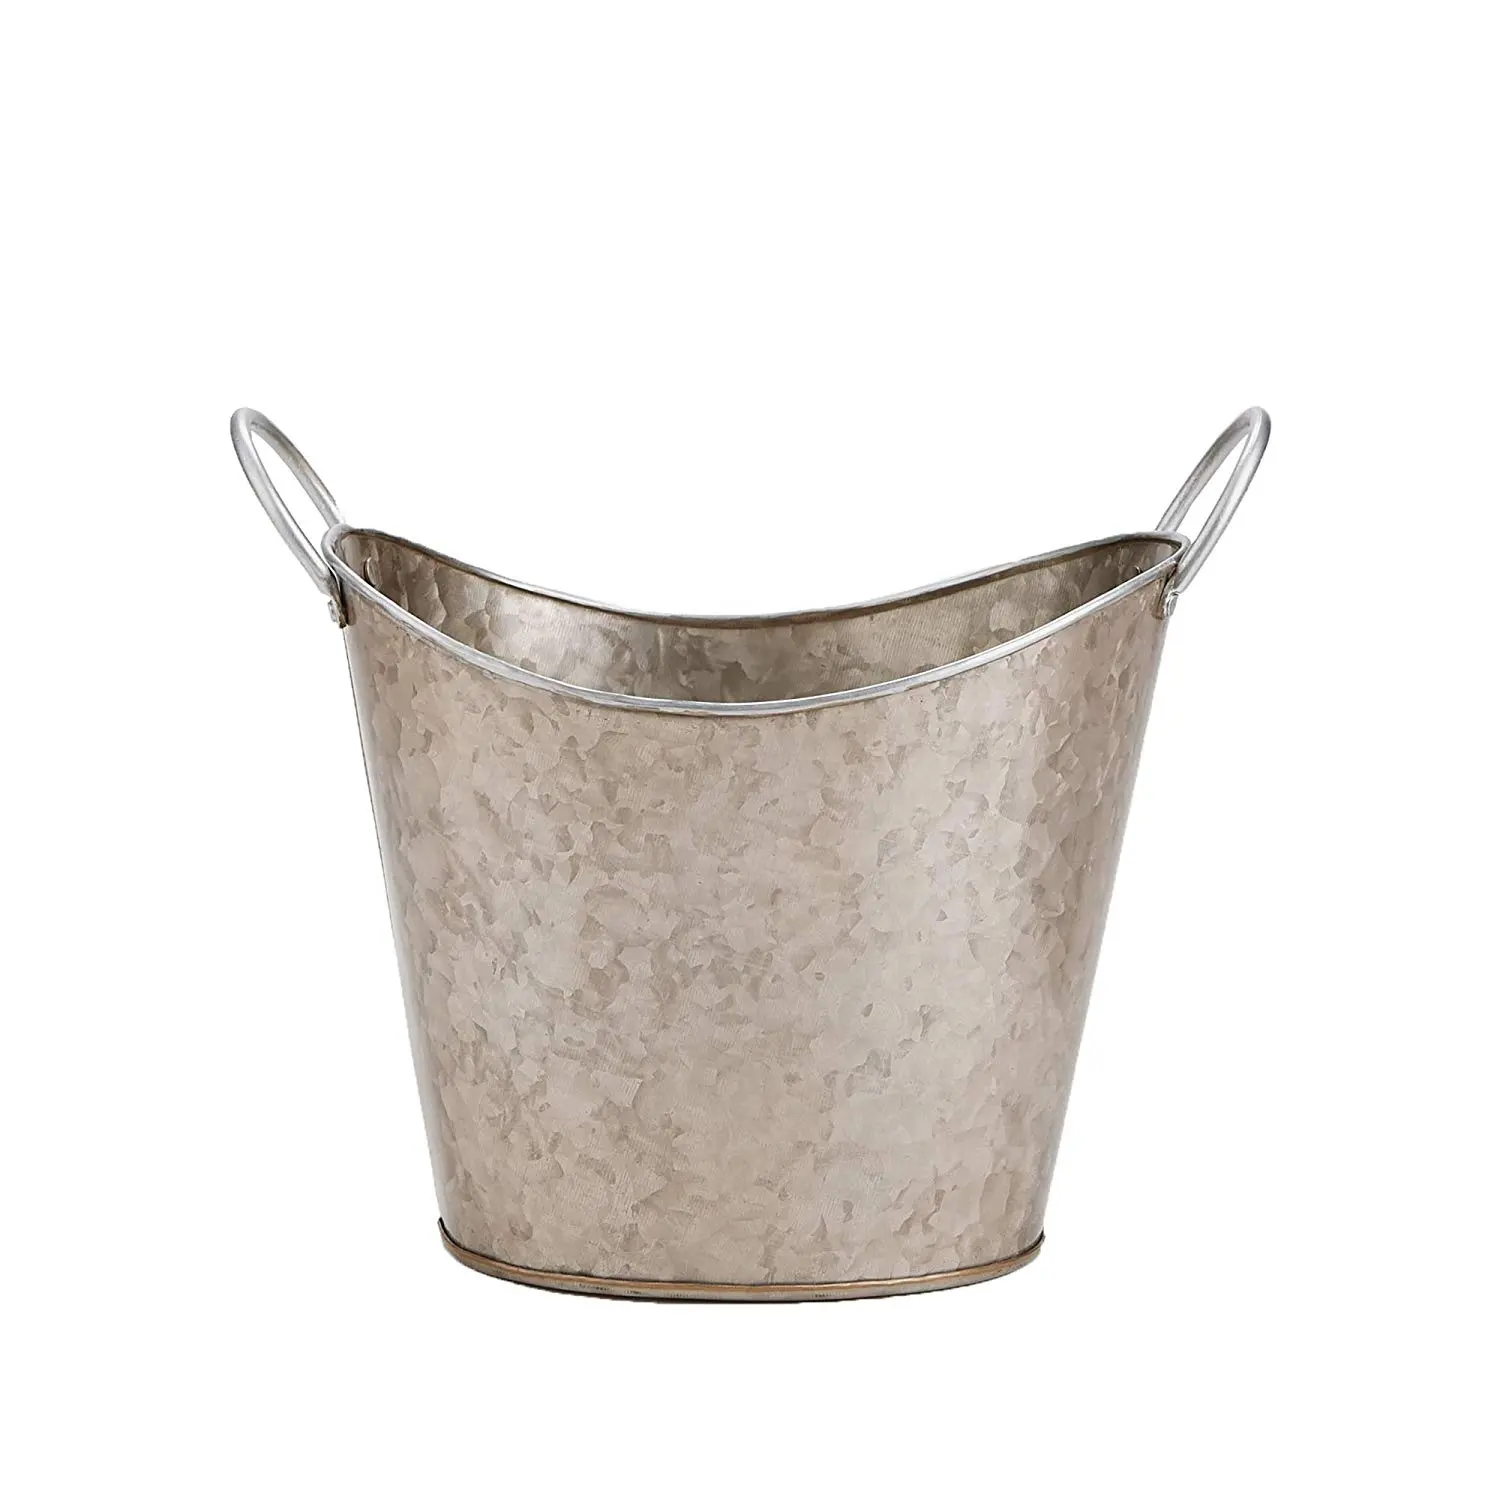 ICE BUCKET WINE CHILLER CHAMPAGNE BUCKET - WITH HANDLE & SHIP SHAPE